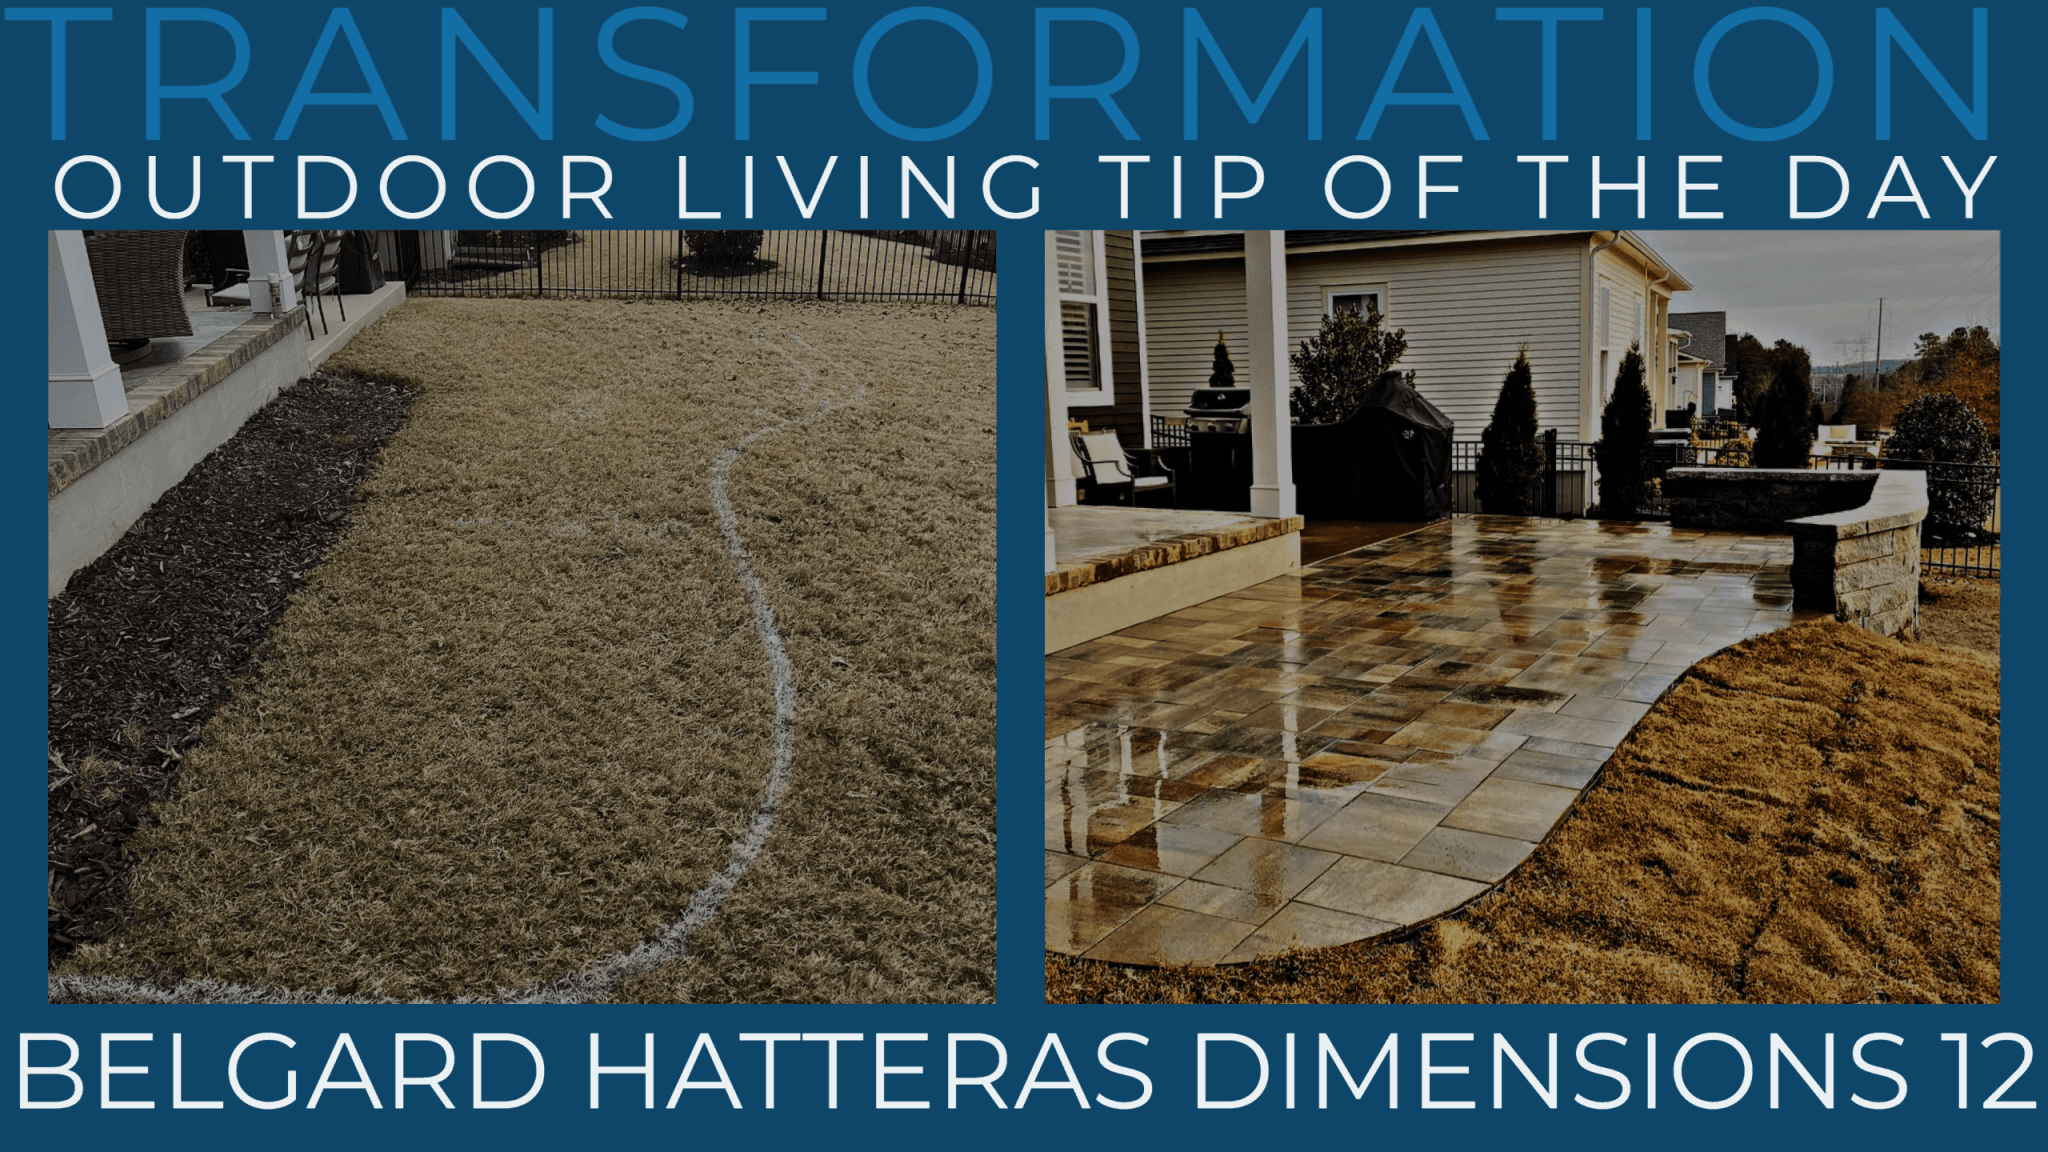 Belgard Hatteras Dimensions 12 Pavers – Outdoor Living Tip of the Day